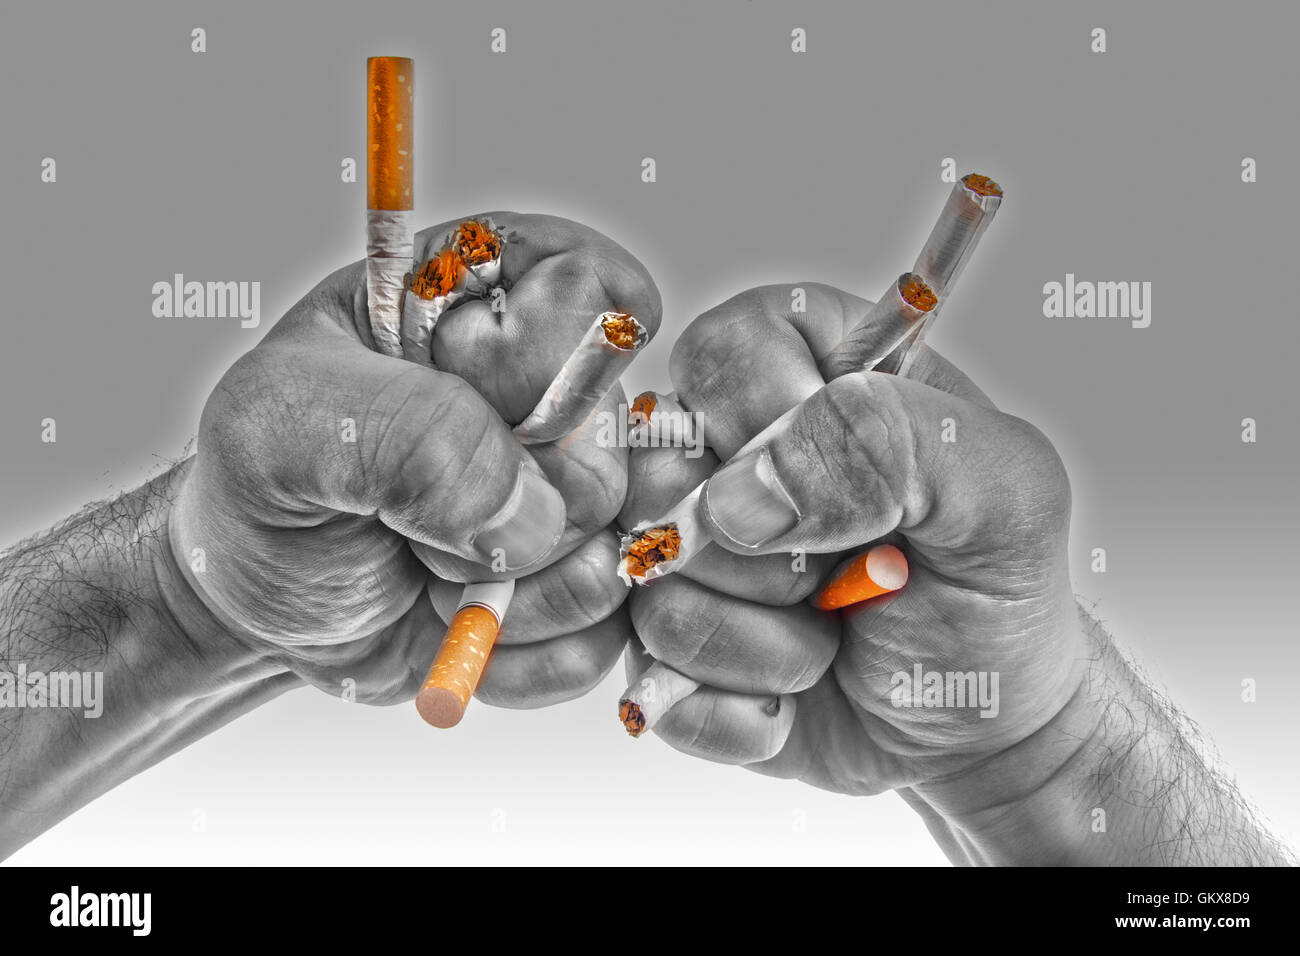 Human hands heatedly breaking cigarettes Stock Photo